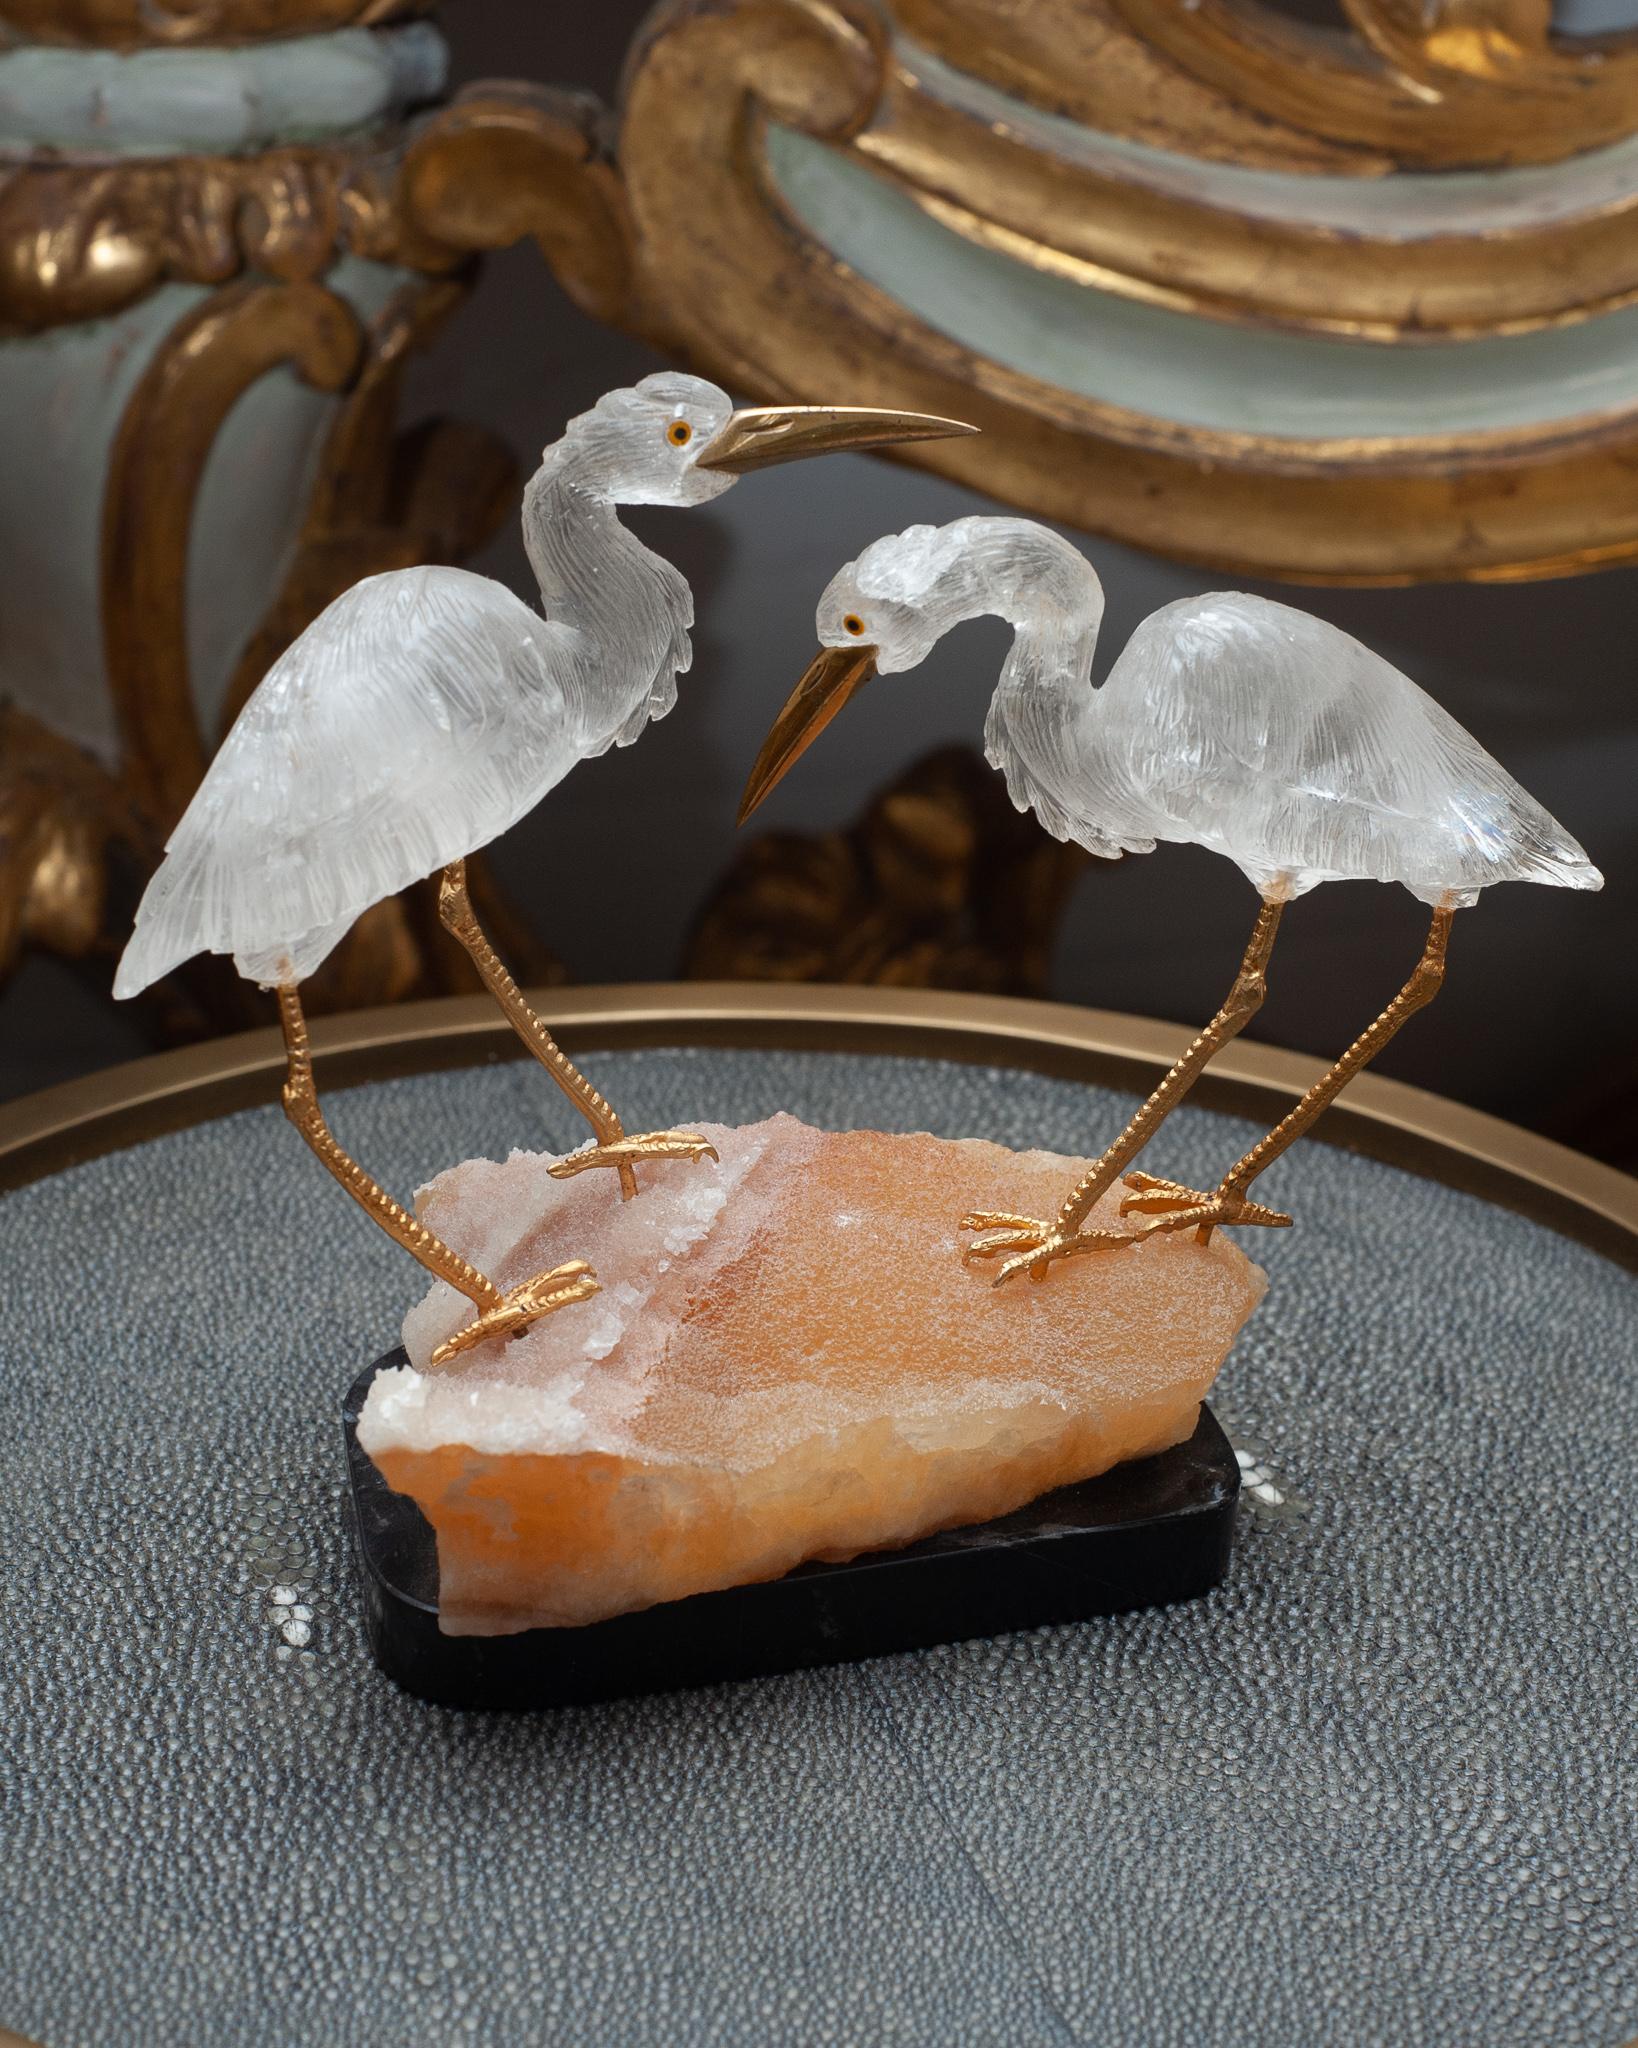 A stunning mid century pair of mineral cranes, carved from quartz / rock crystal, with brass legs and beaks, and mounted on a base of orange calcite and black marble. An exceptional and rare quality carving - this marriage of craftsmanship and